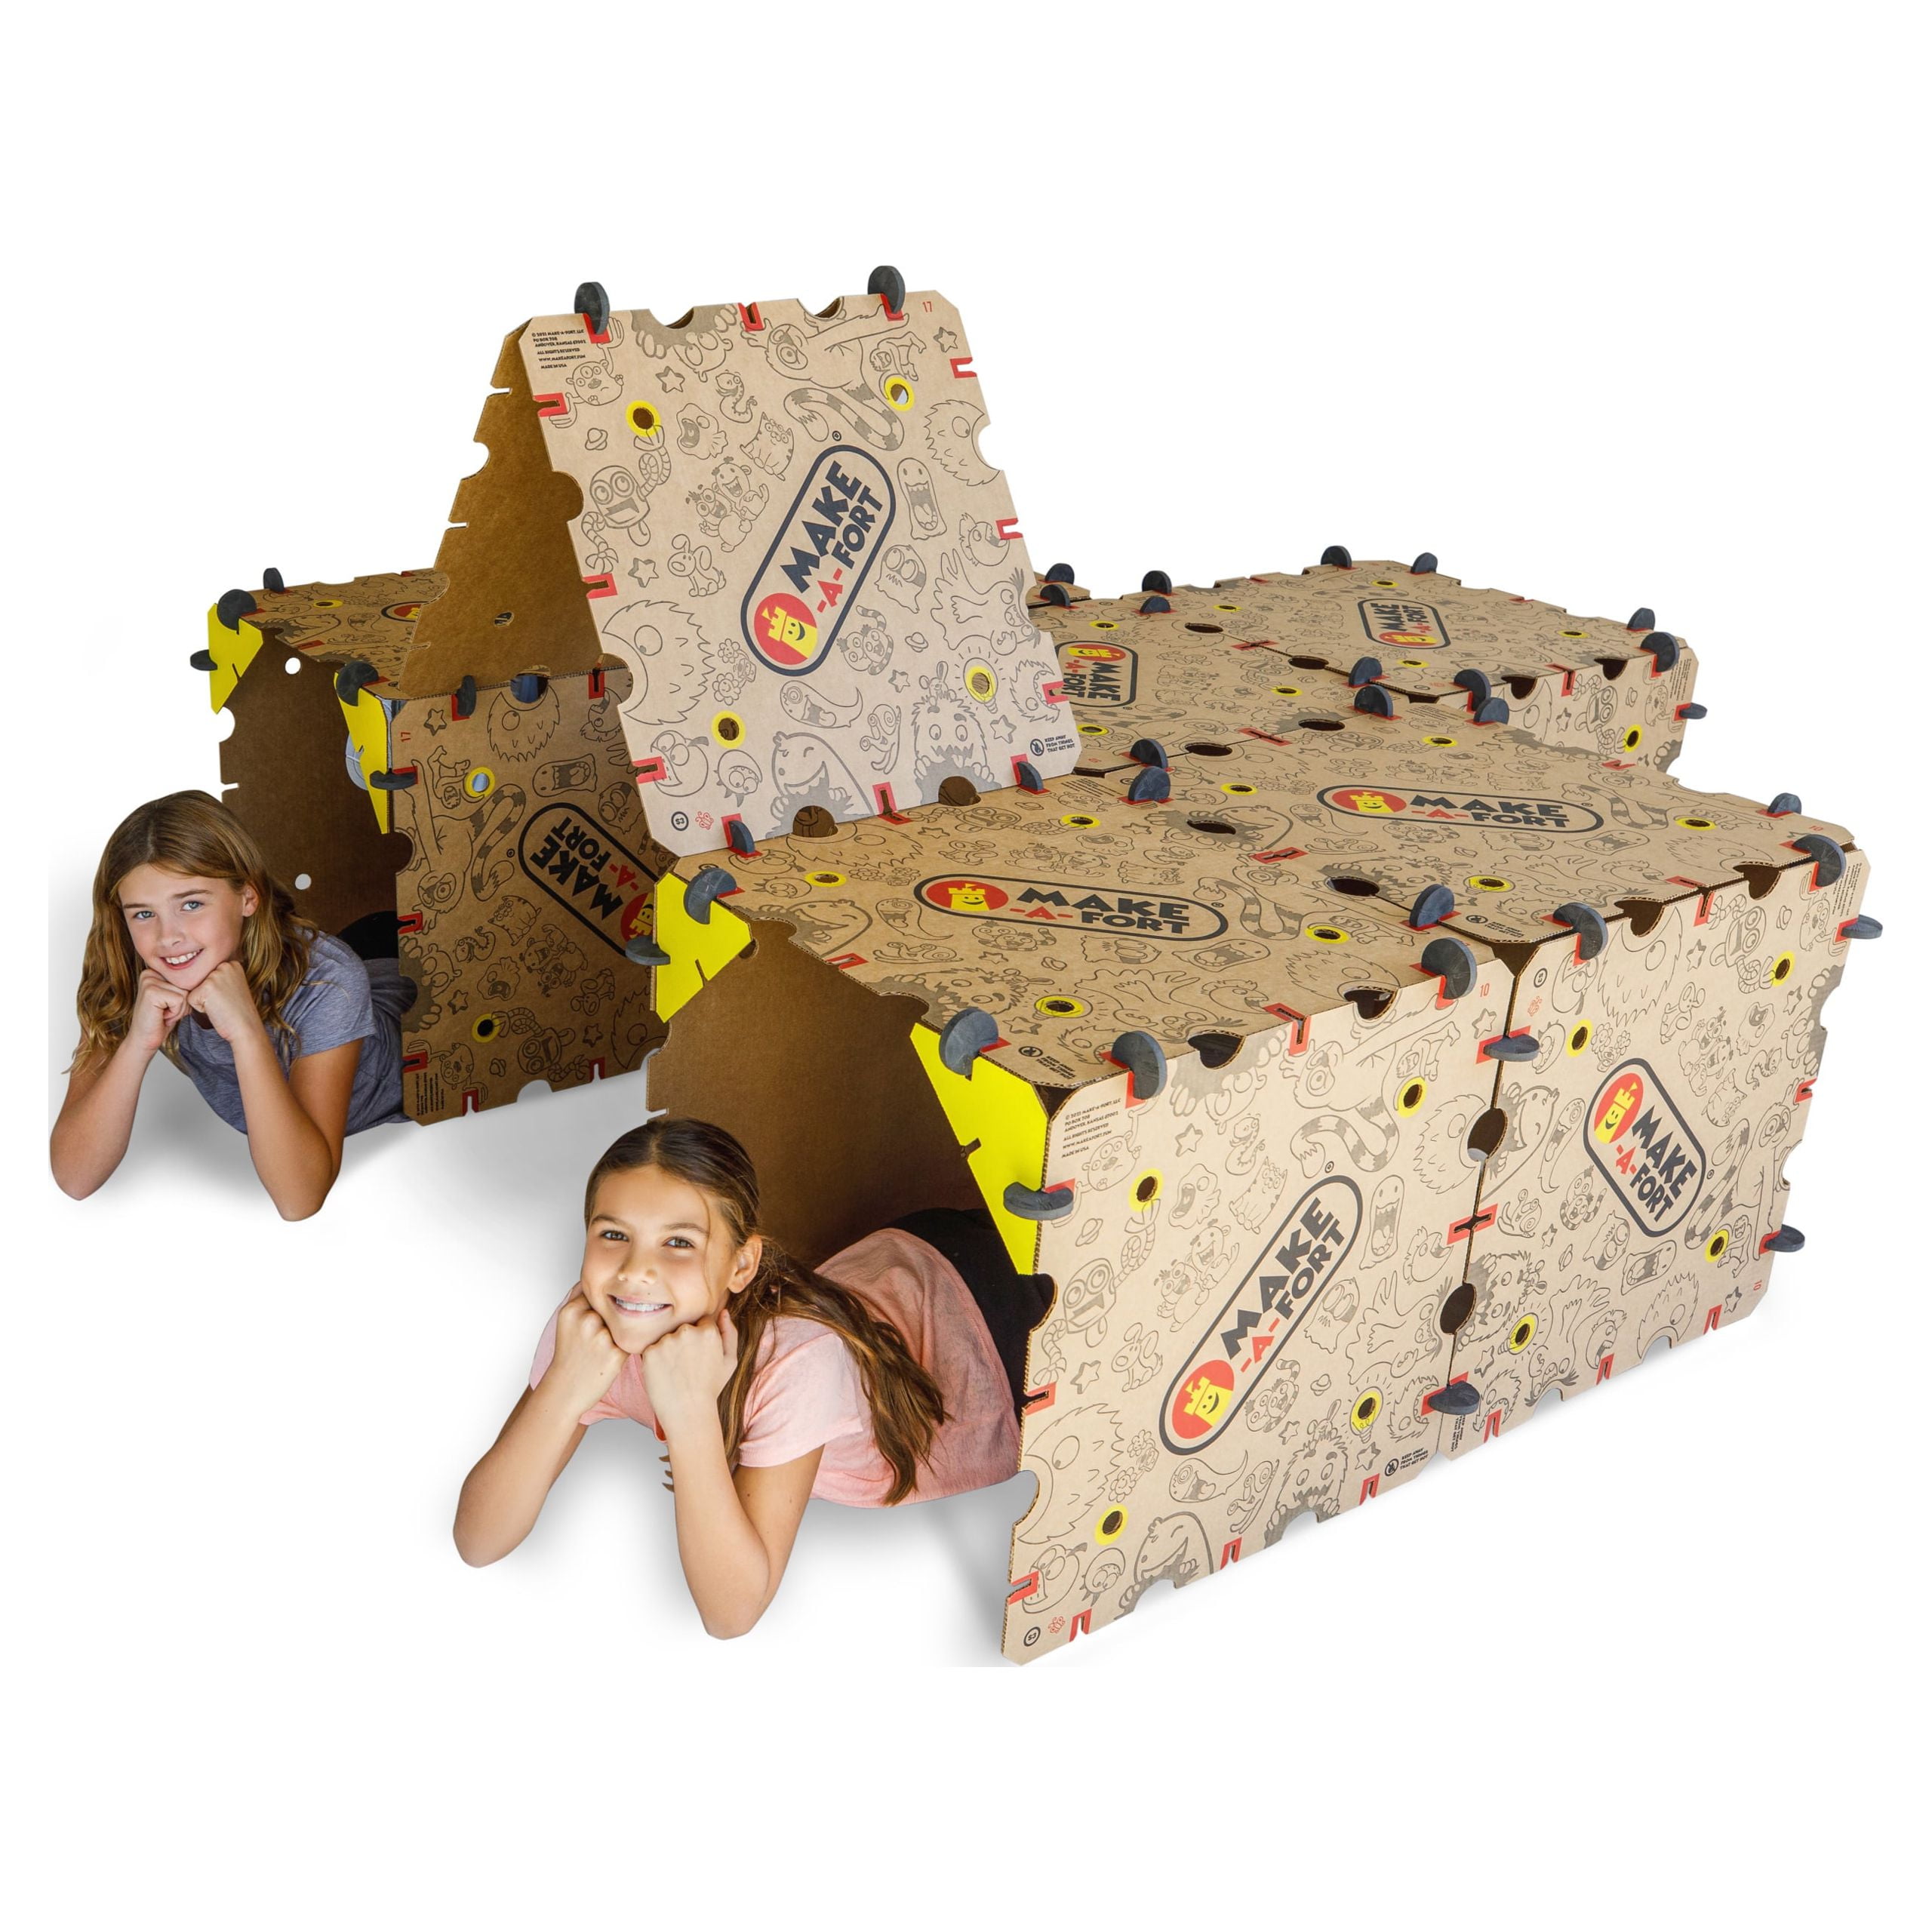 Make-A-Fort  Build really big forts for kids